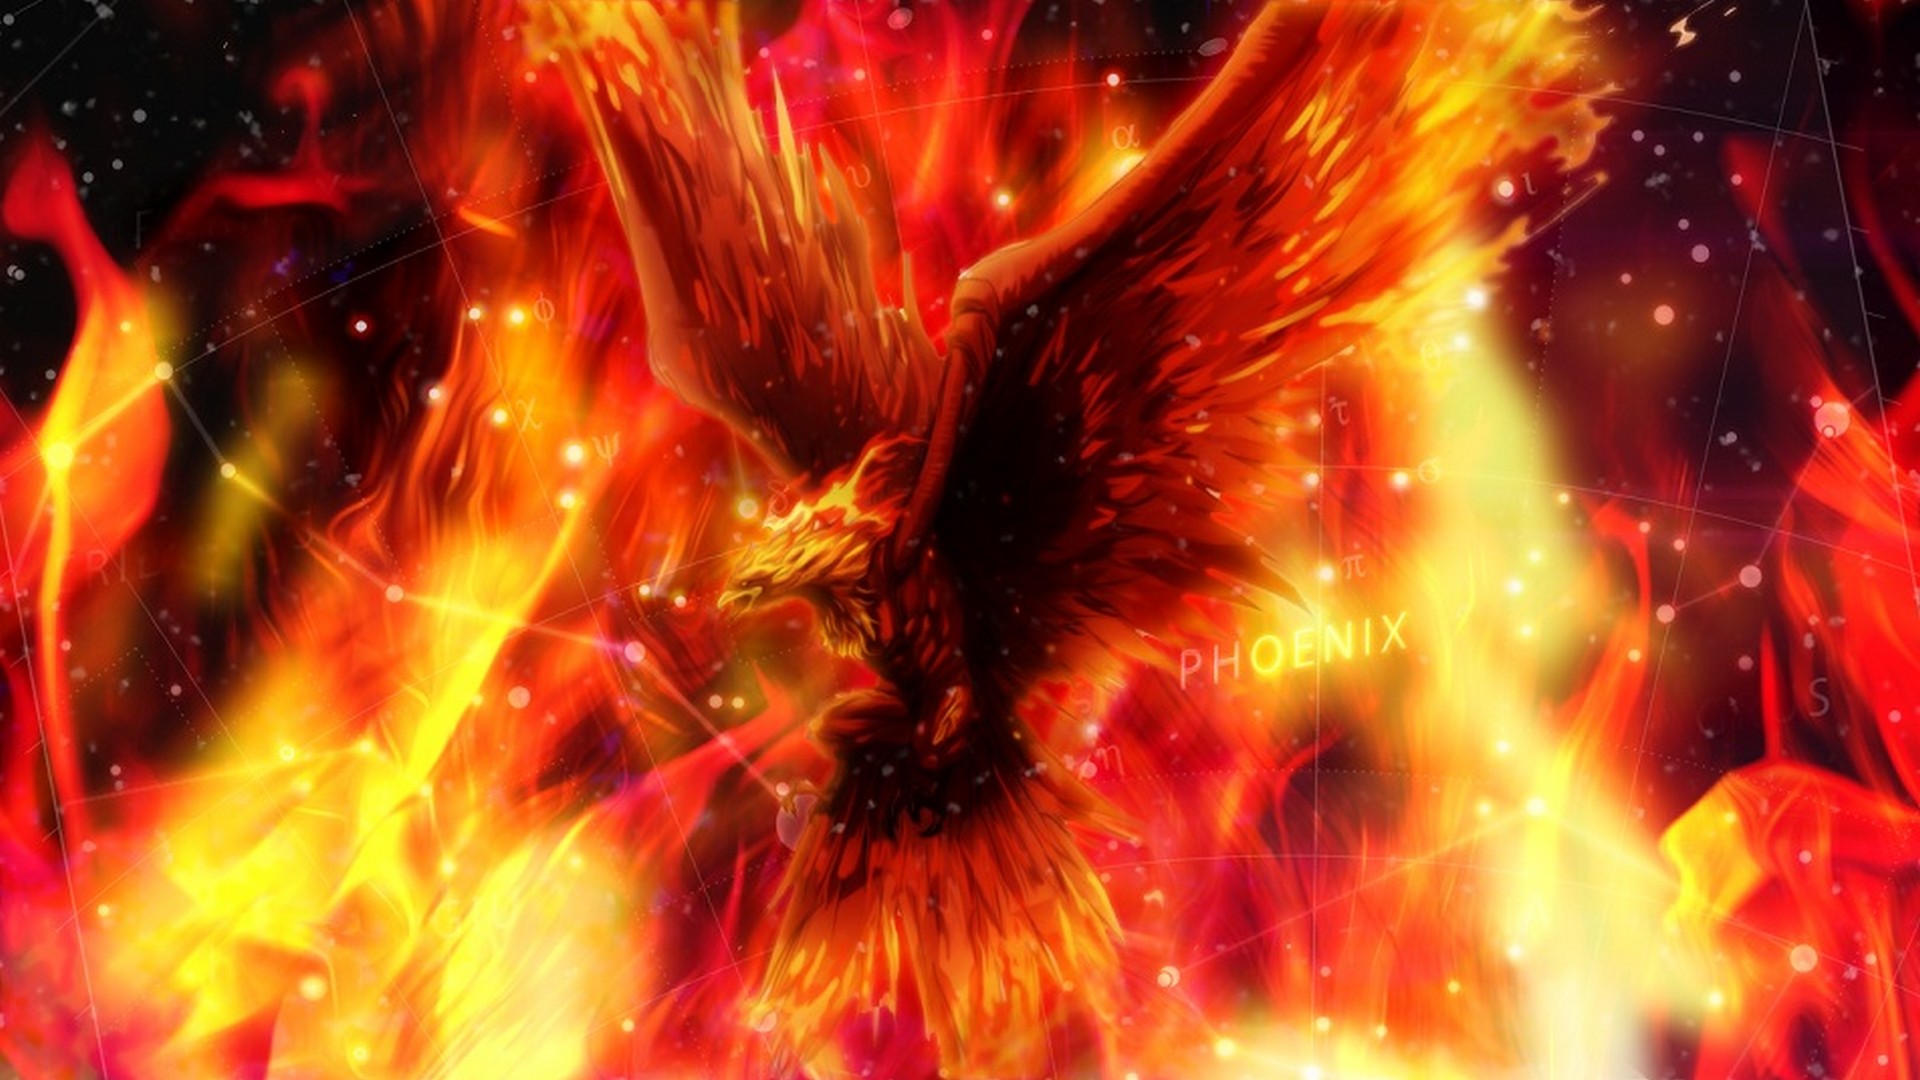 Dark Phoenix Desktop Wallpaper with resolution 1920X1080 pixel. You can use this wallpaper as background for your desktop Computer Screensavers, Android or iPhone smartphones